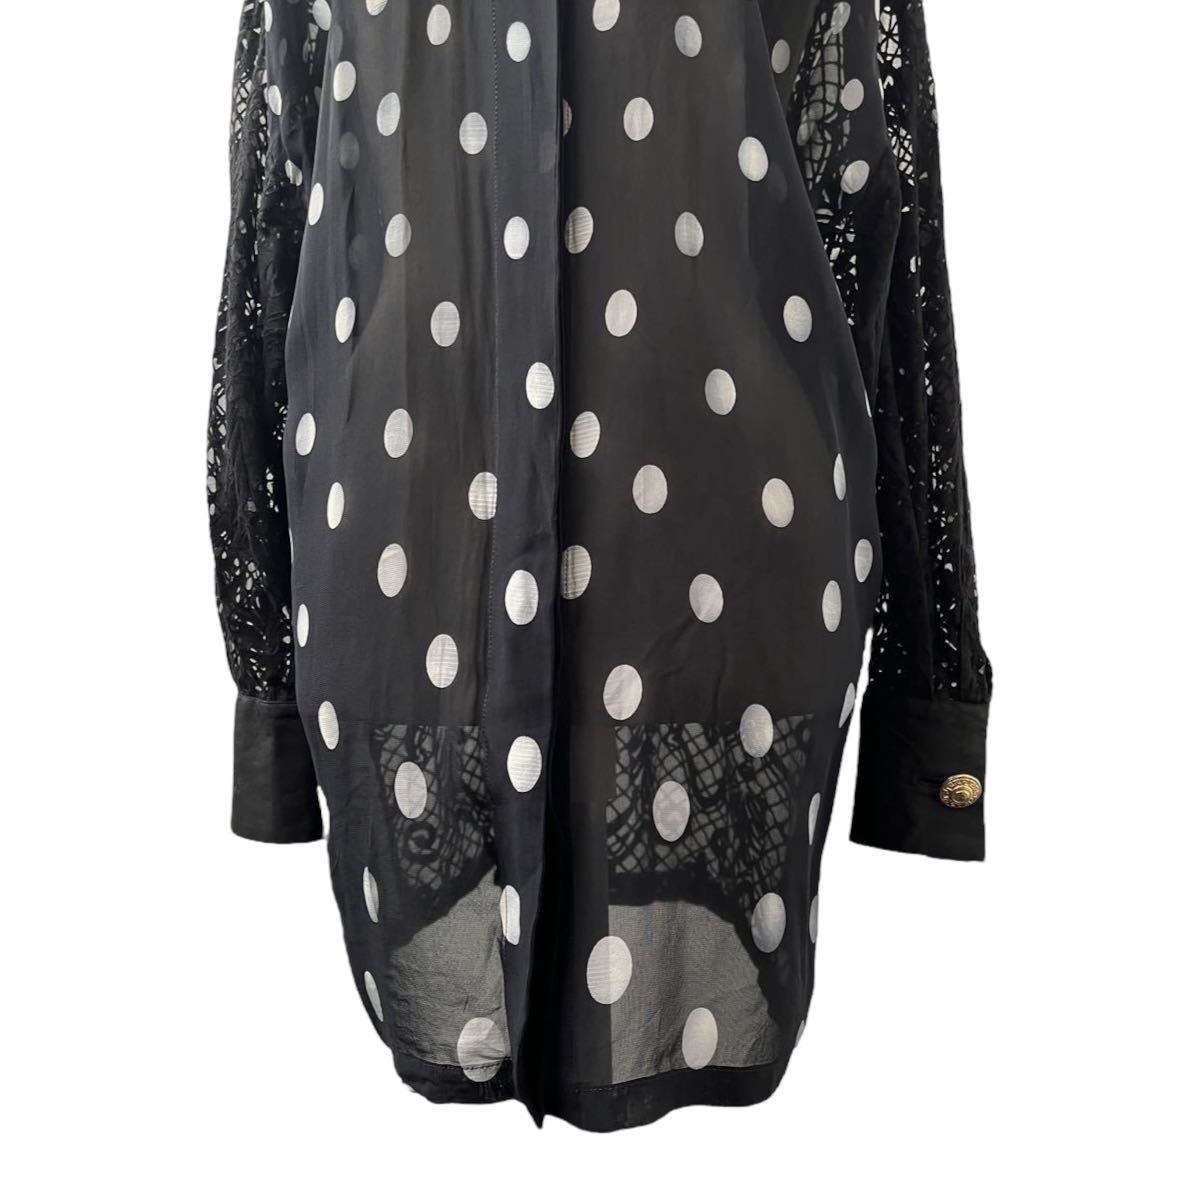 Vintage Gianni Versace Couture Sheer Polka Dot Button-Down Tunic with Burnout Lace Back and Sleeves - 6